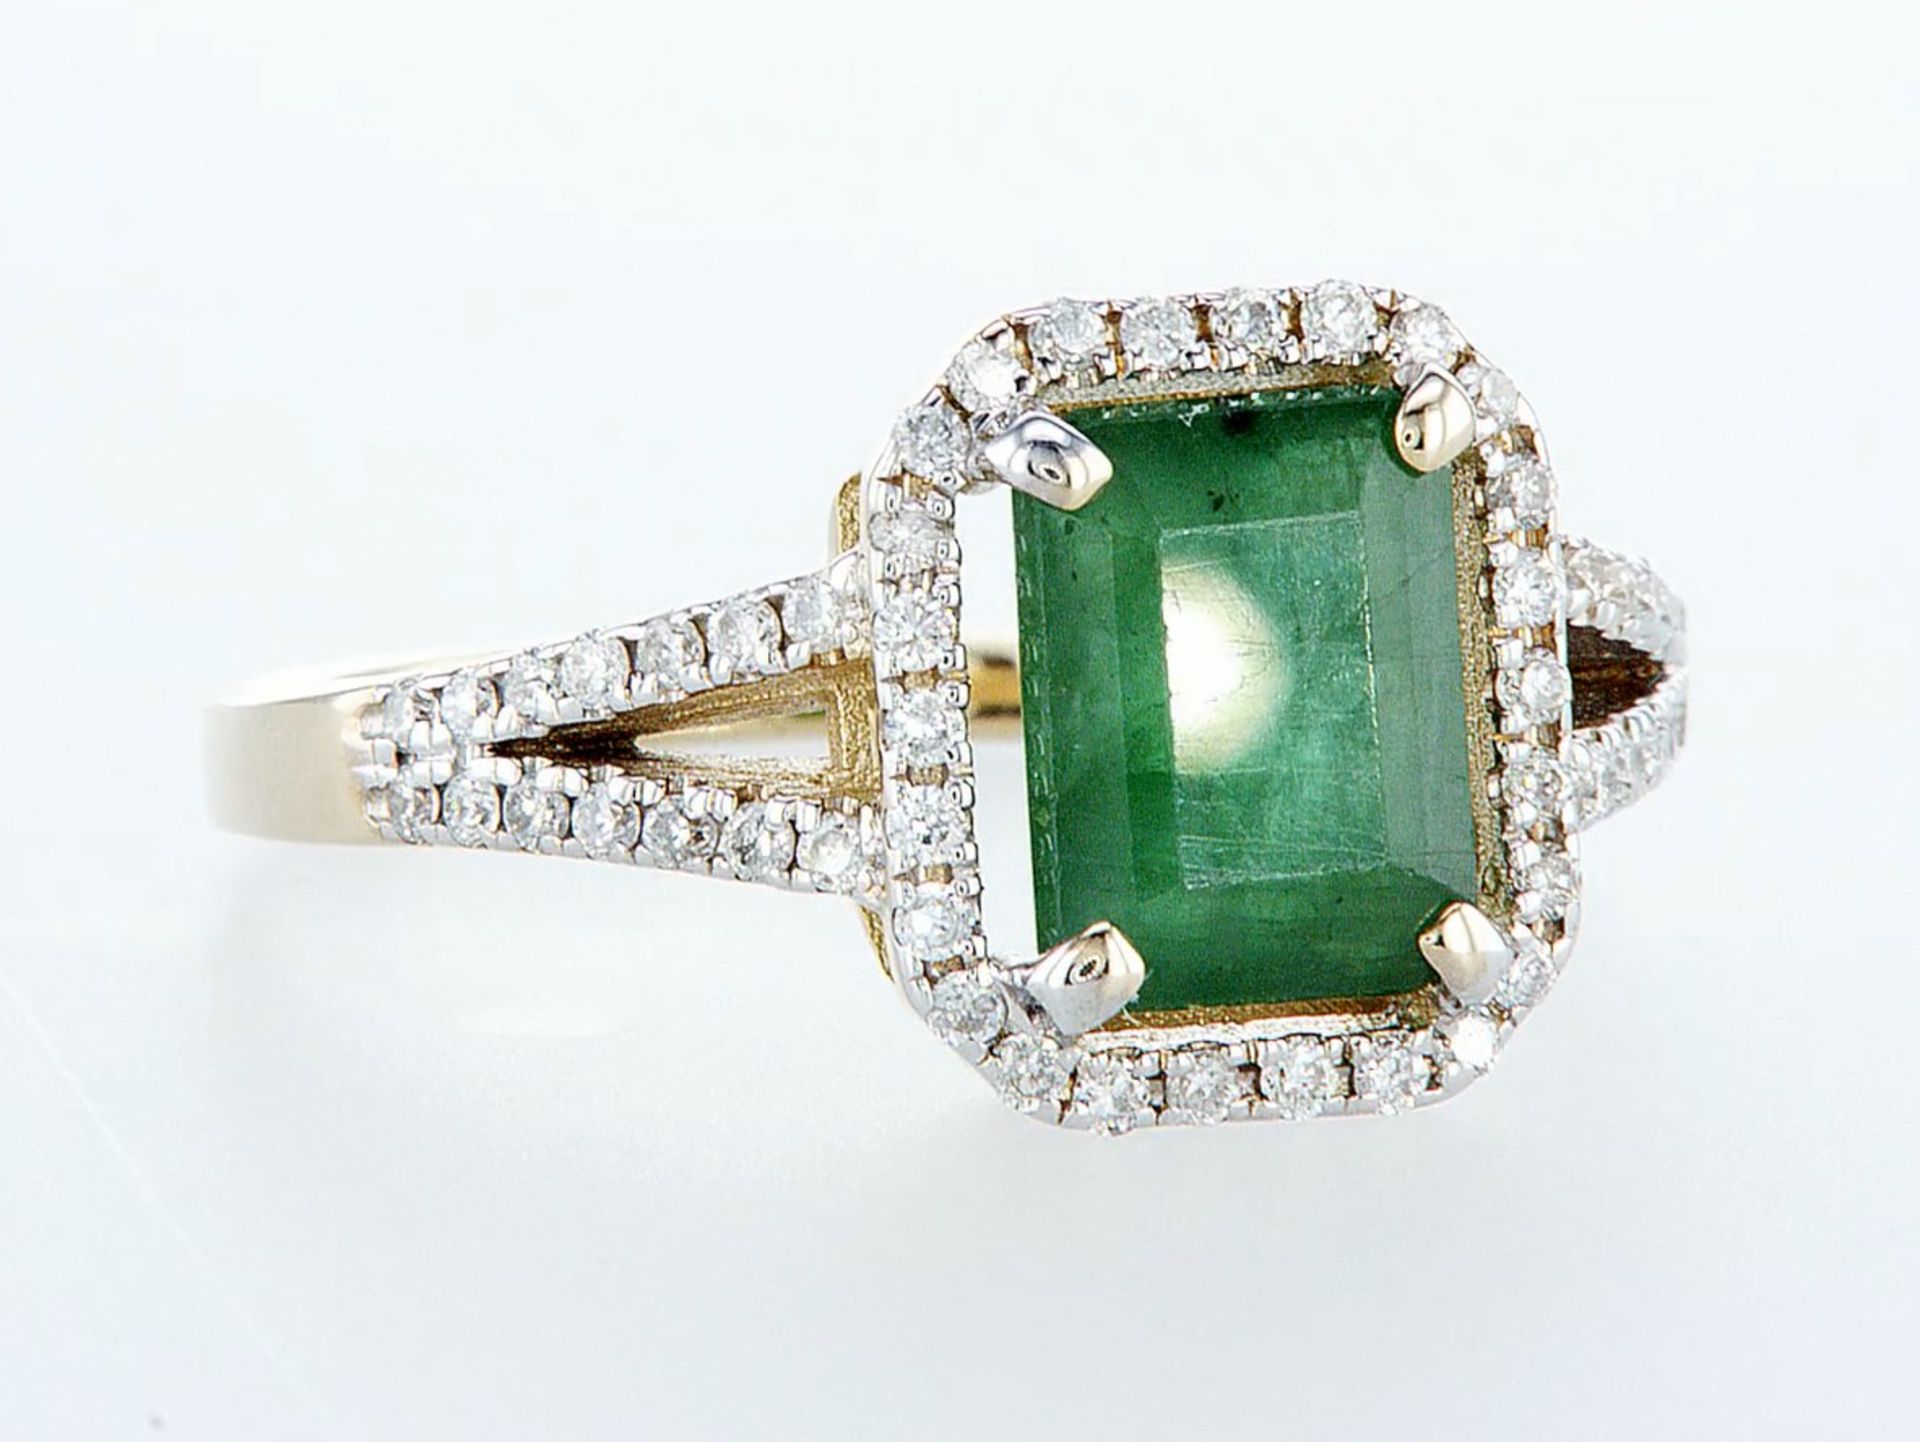 14 kt. White gold, Yellow gold - Ring - 2.01 ct Emerald - Diamonds - Image 6 of 7